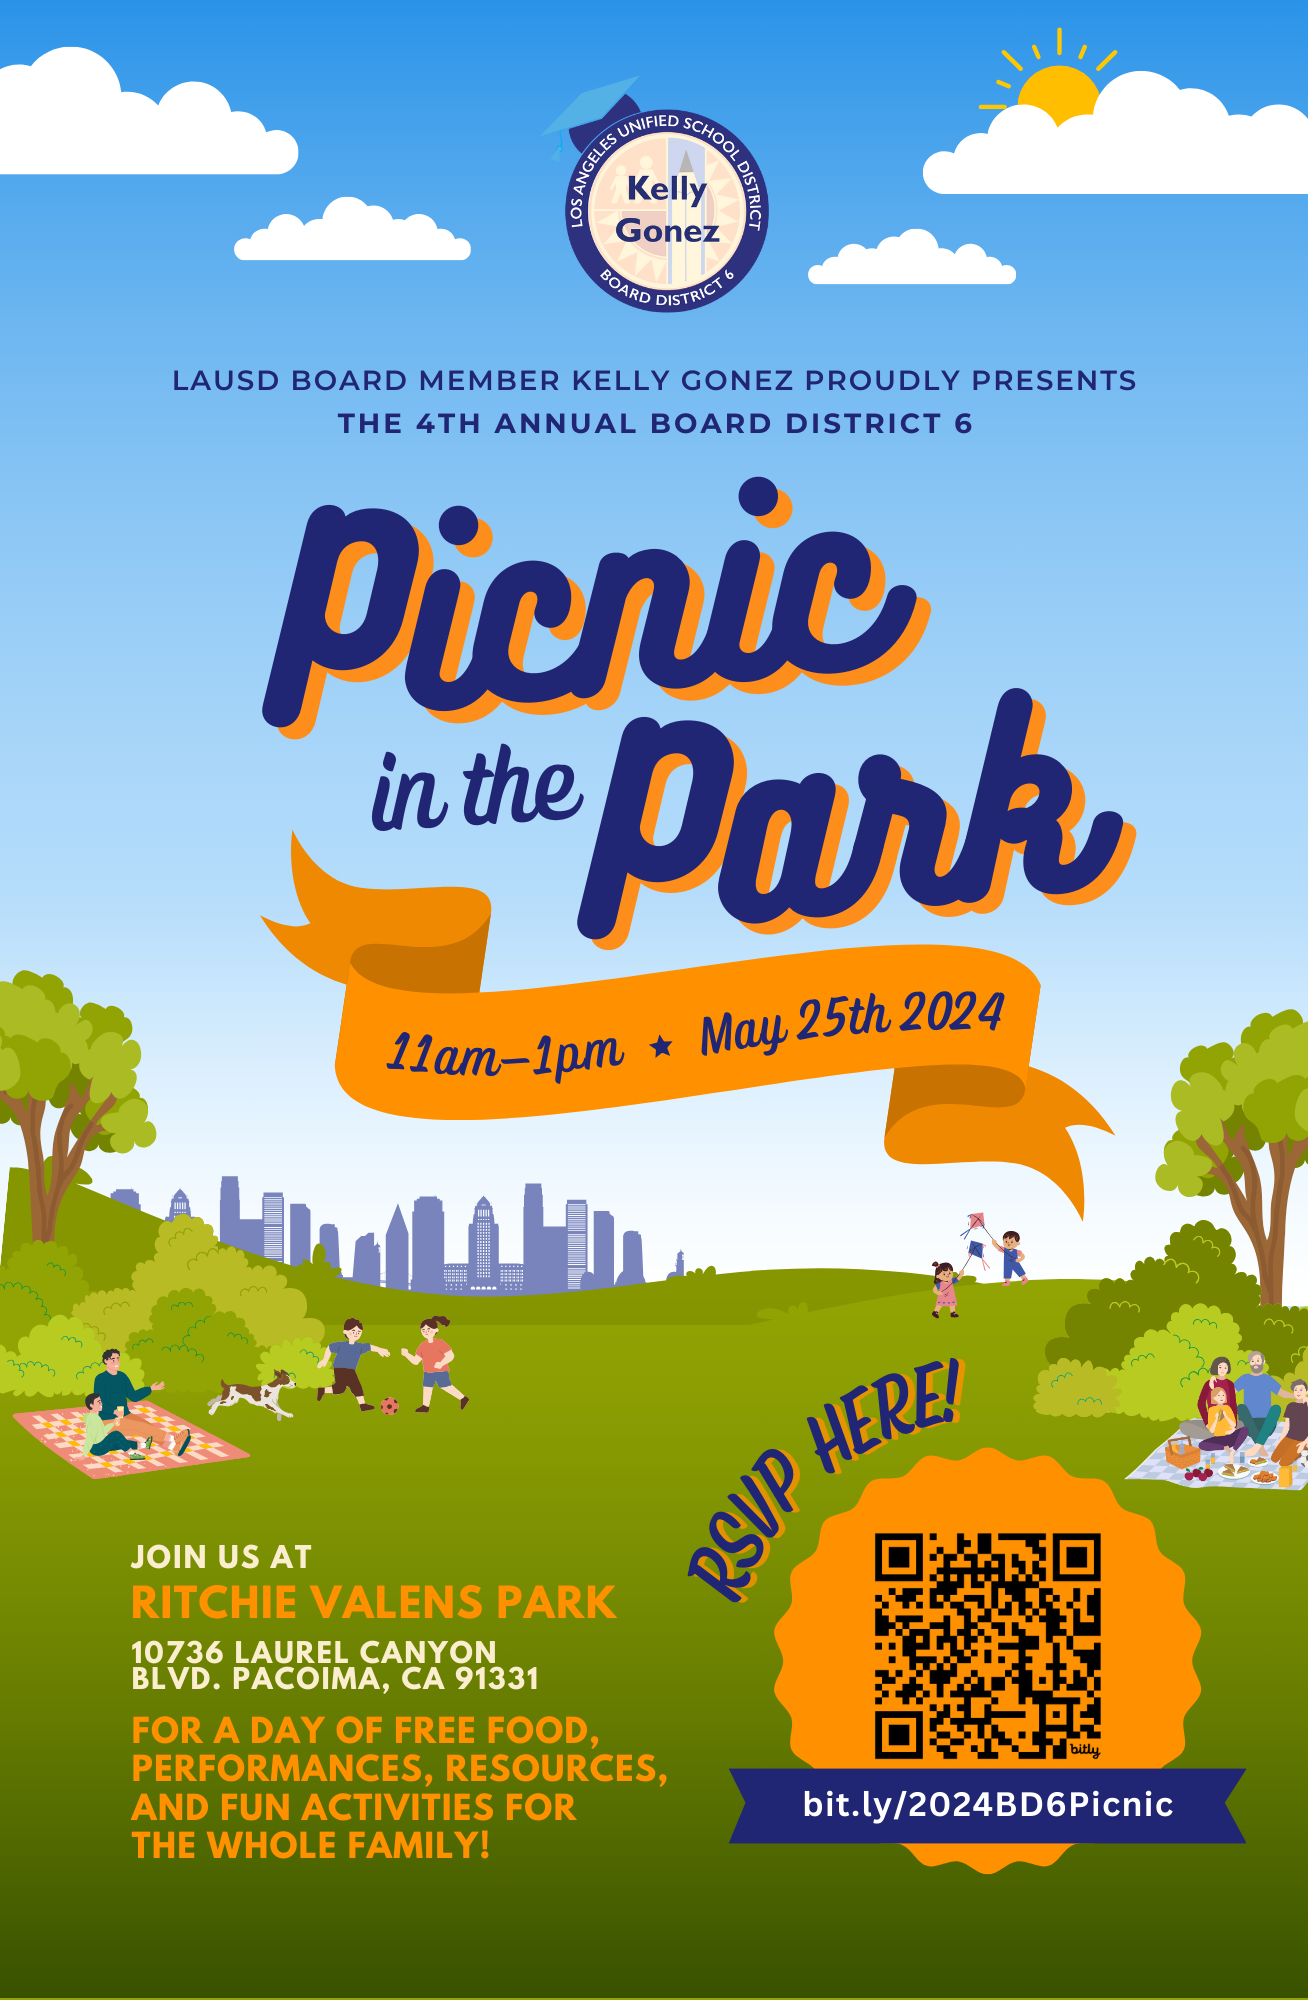 Kelly Gonez hosts Picnic in the Park on May 25